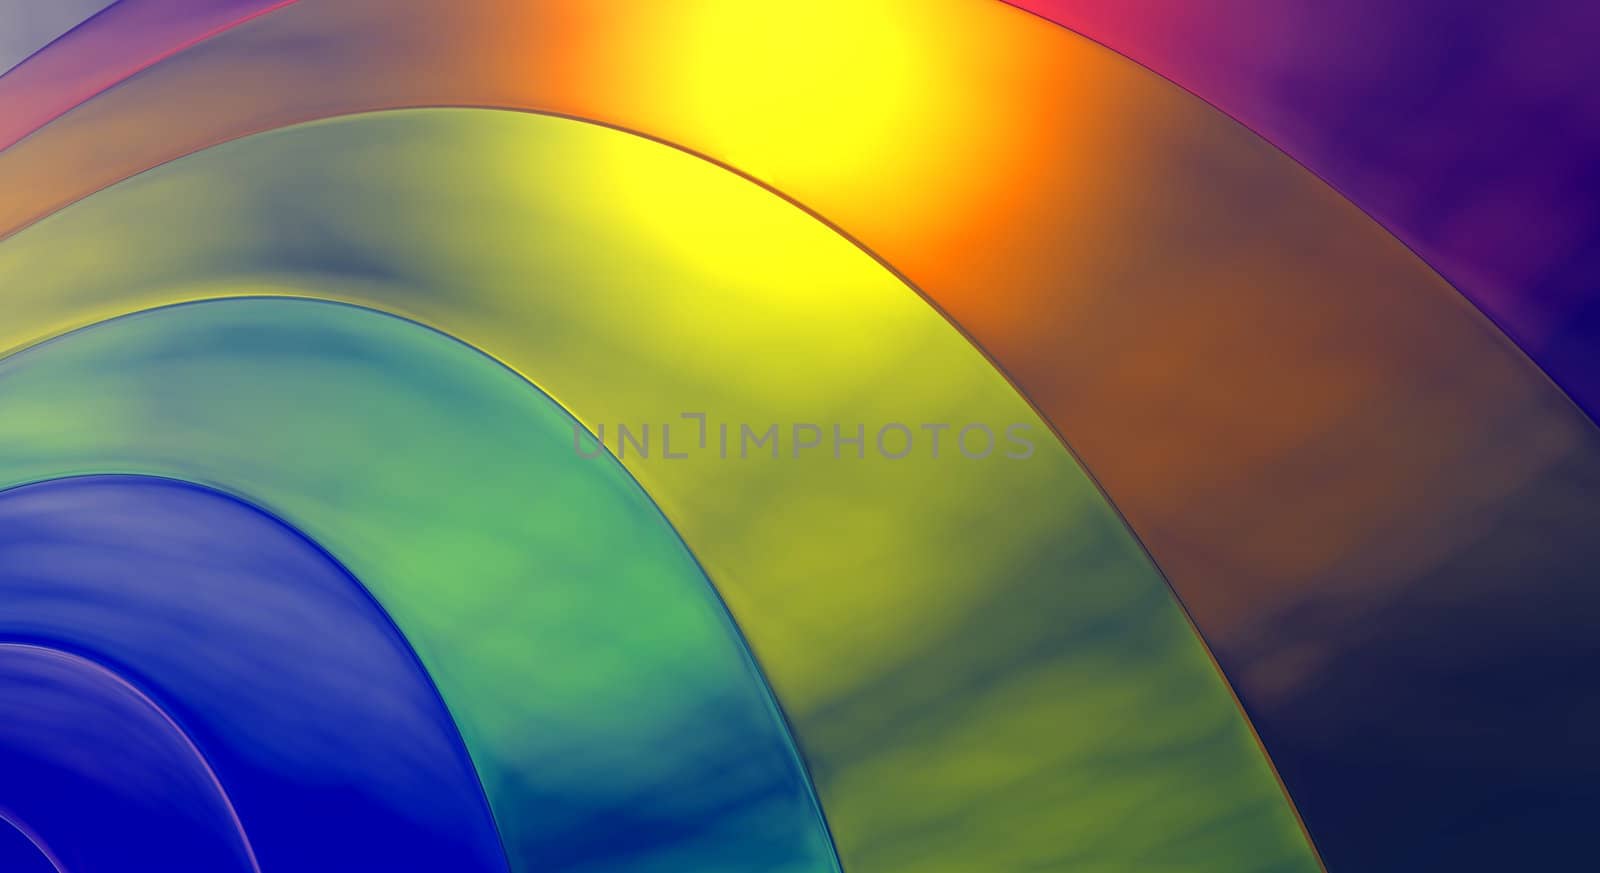 A close up of an illustration of a rainbow.